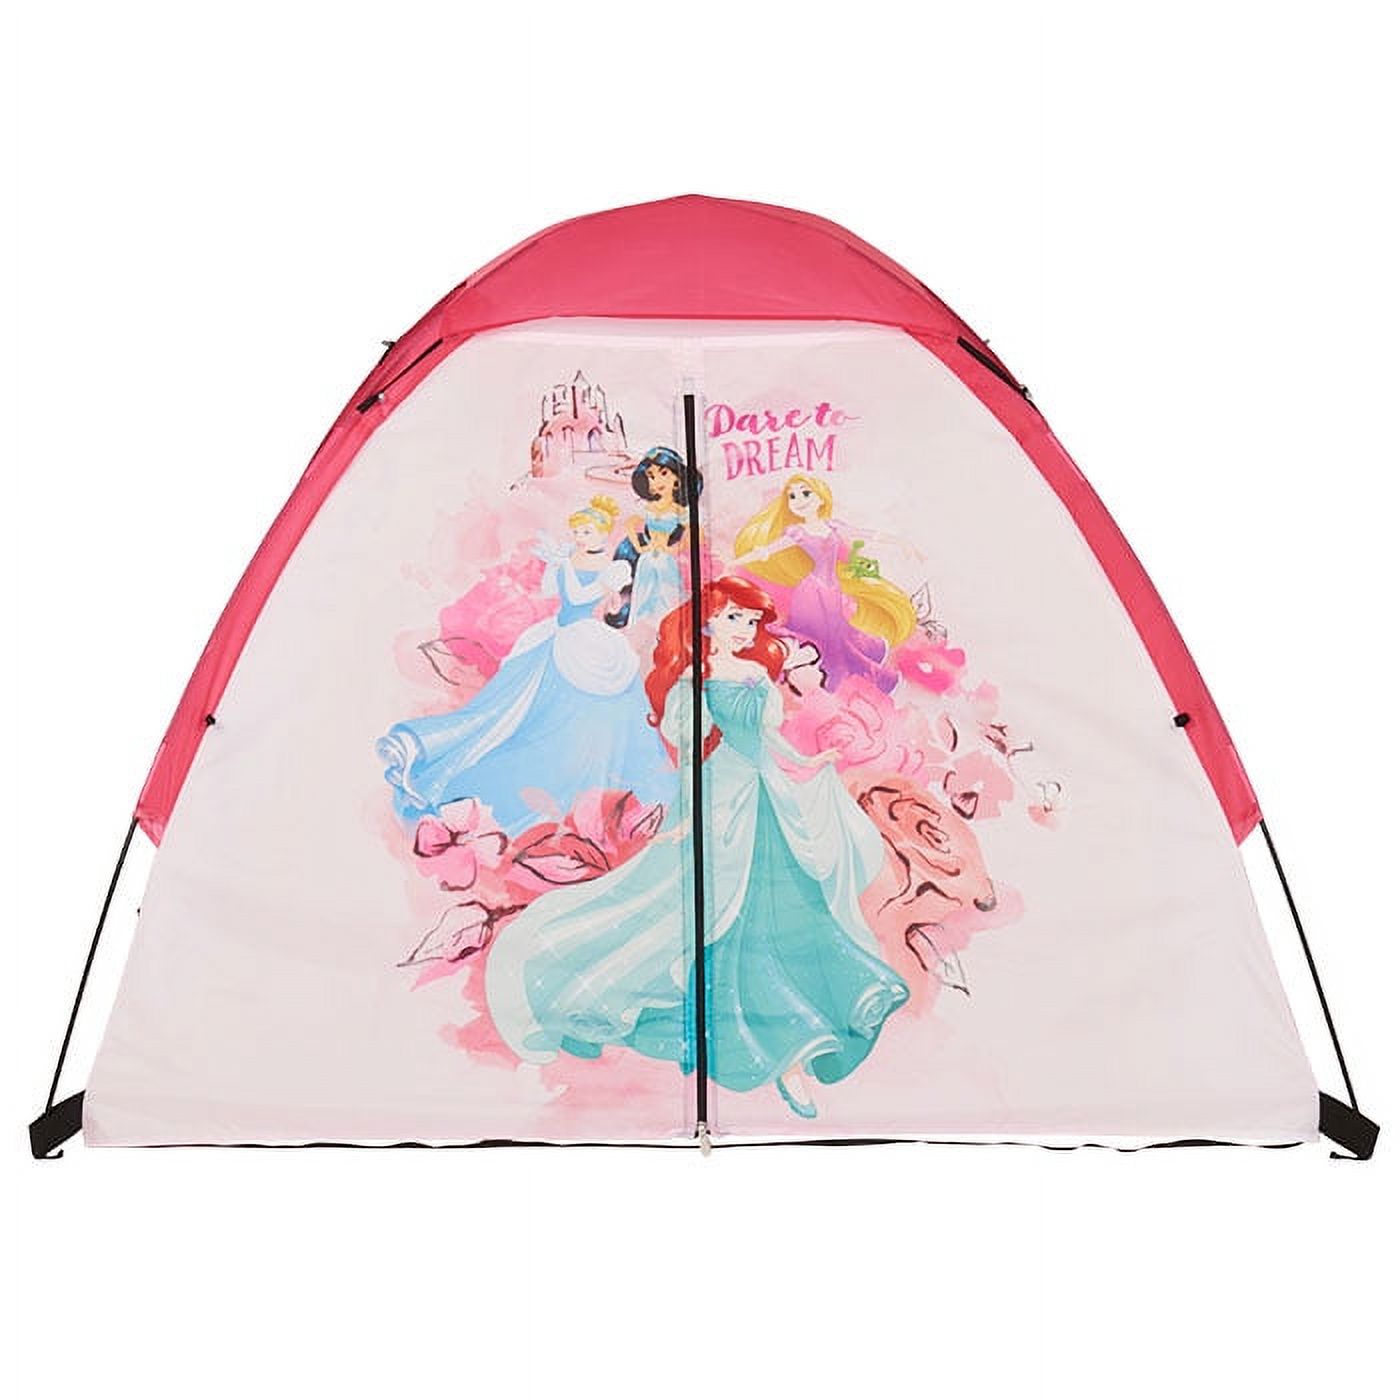 Disney Princess Kid's Indoor/Outdoor Unisex 4-Piece Sling Kit, Ages 4+, Multi-Color, Dome Tent, One Room - image 2 of 8